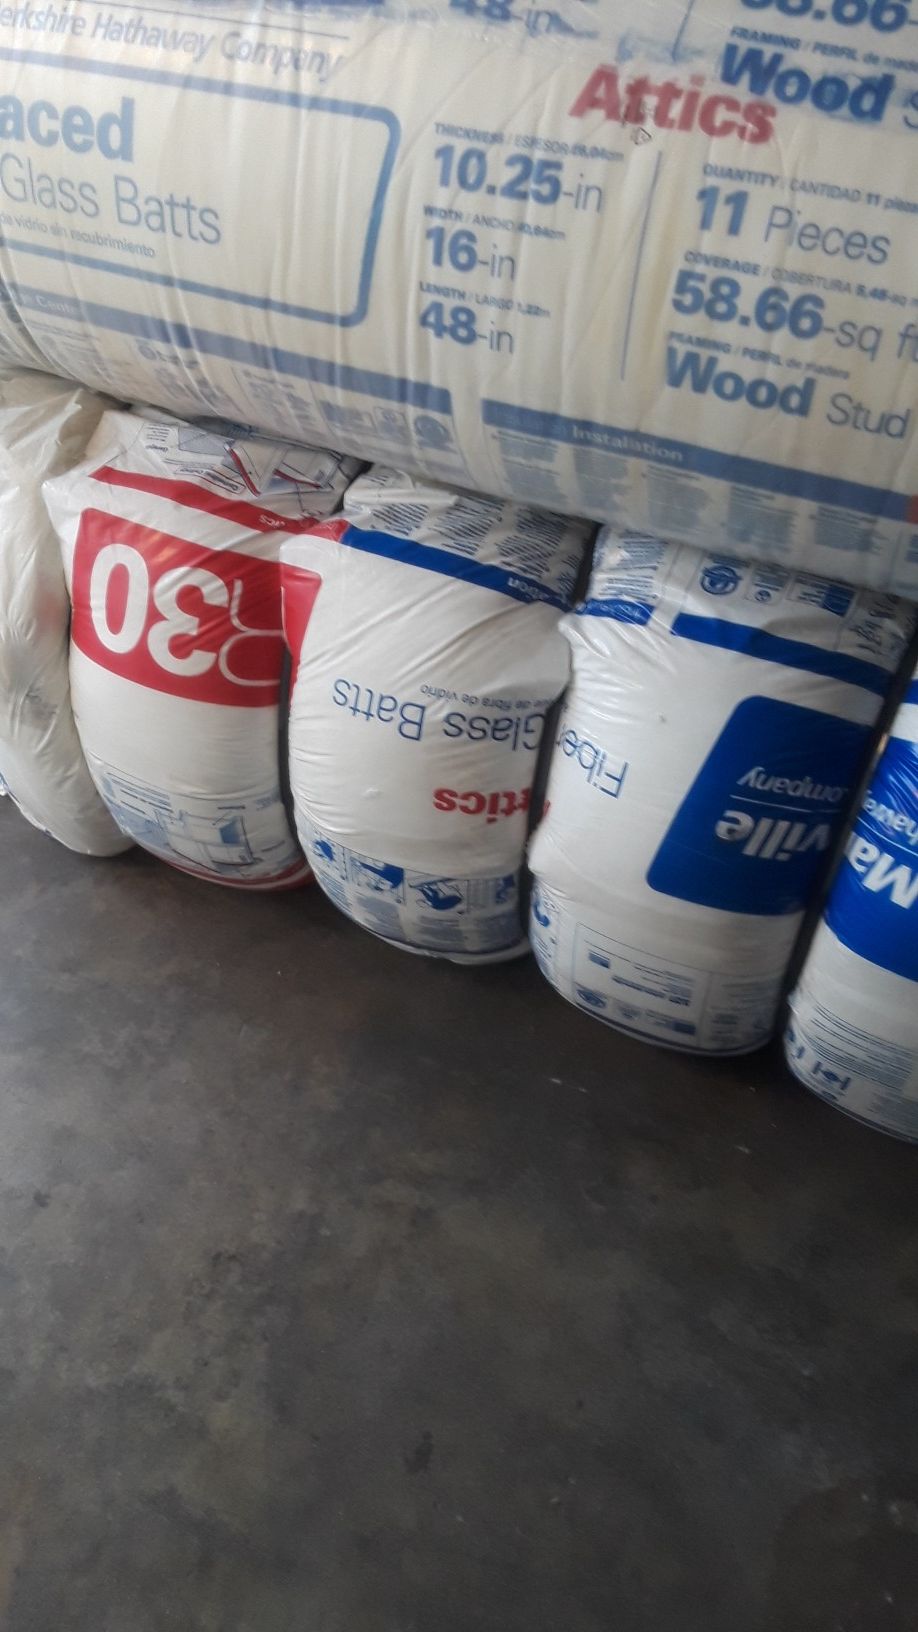 Insulation for walls 2x4 R15x15 cover 87 square feet each bag the price is for each